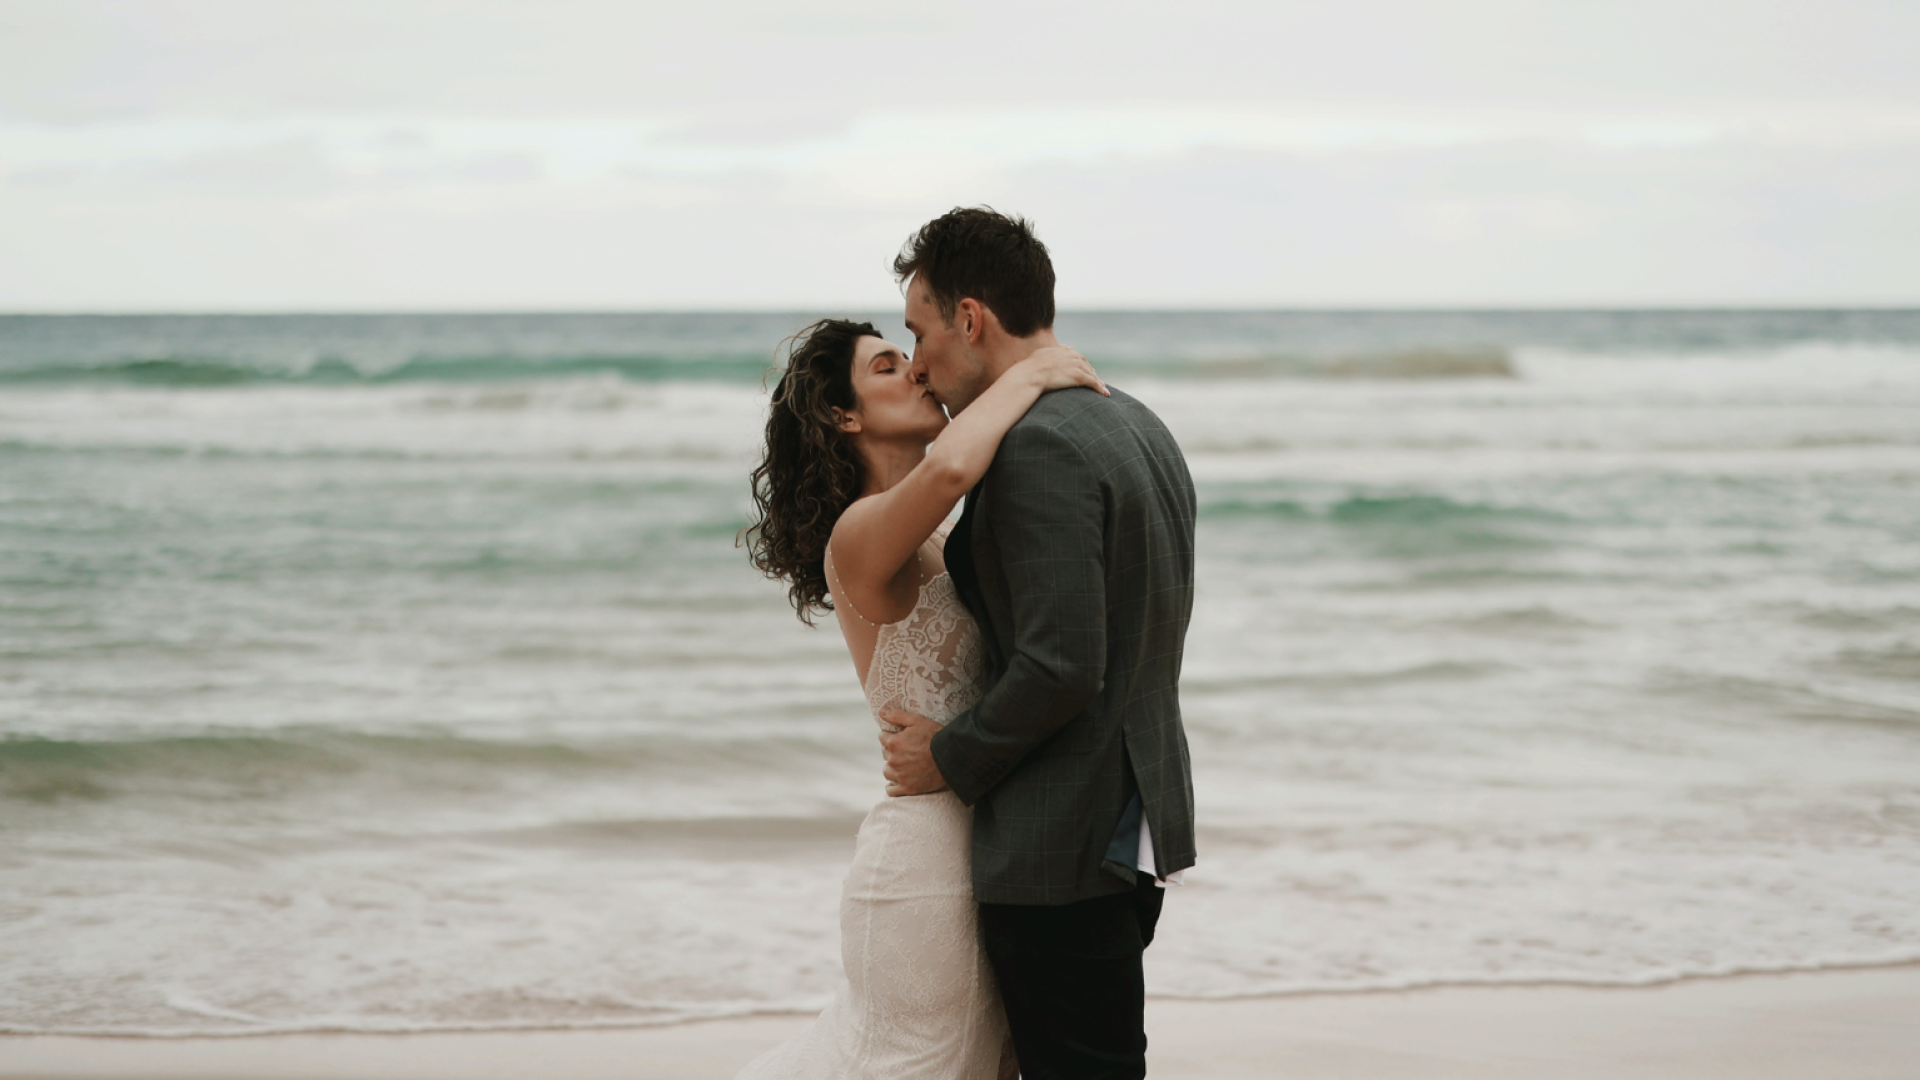 A Man And Woman Kissing On A Beach